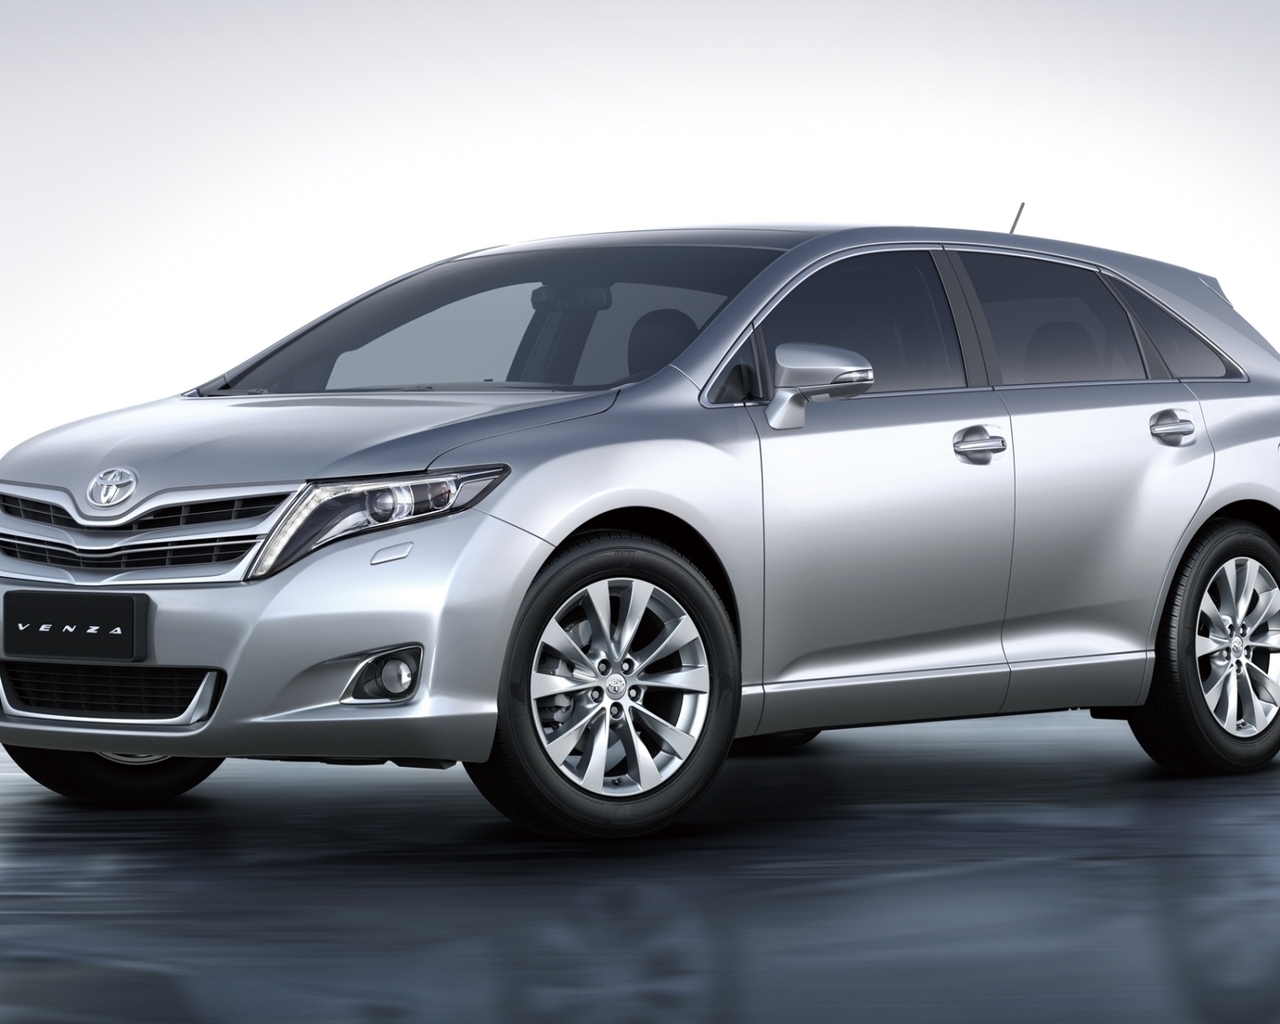 Toyota Venza for 1280 x 1024 resolution